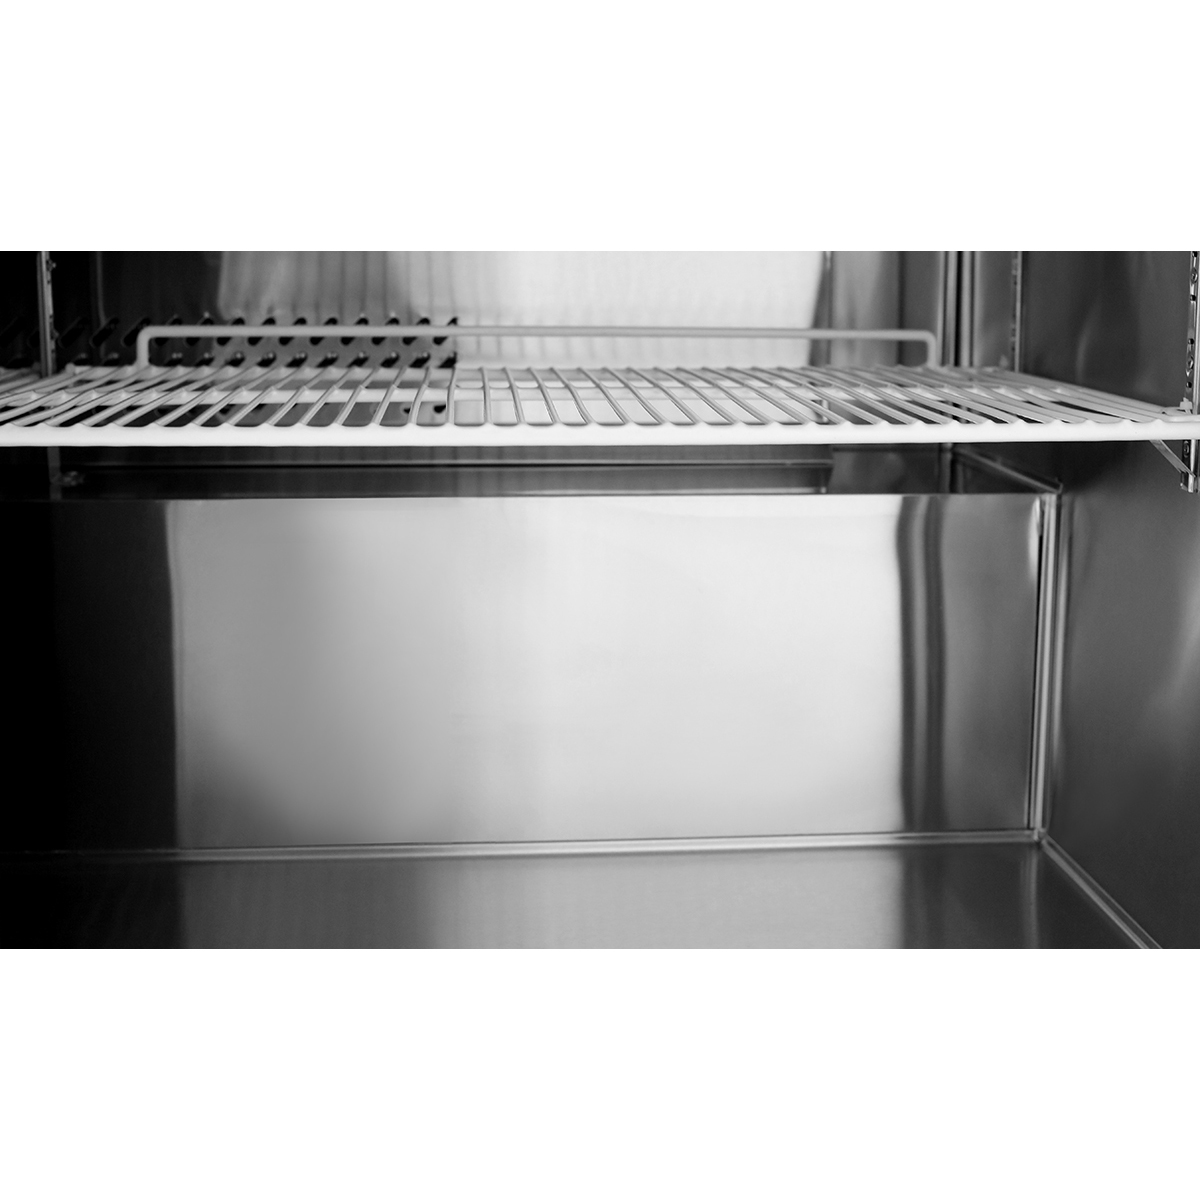 Atosa MGF8408GR Worktop Refrigerator, One-Section, 27-1/2"W, 7.2 cu. ft. image 2